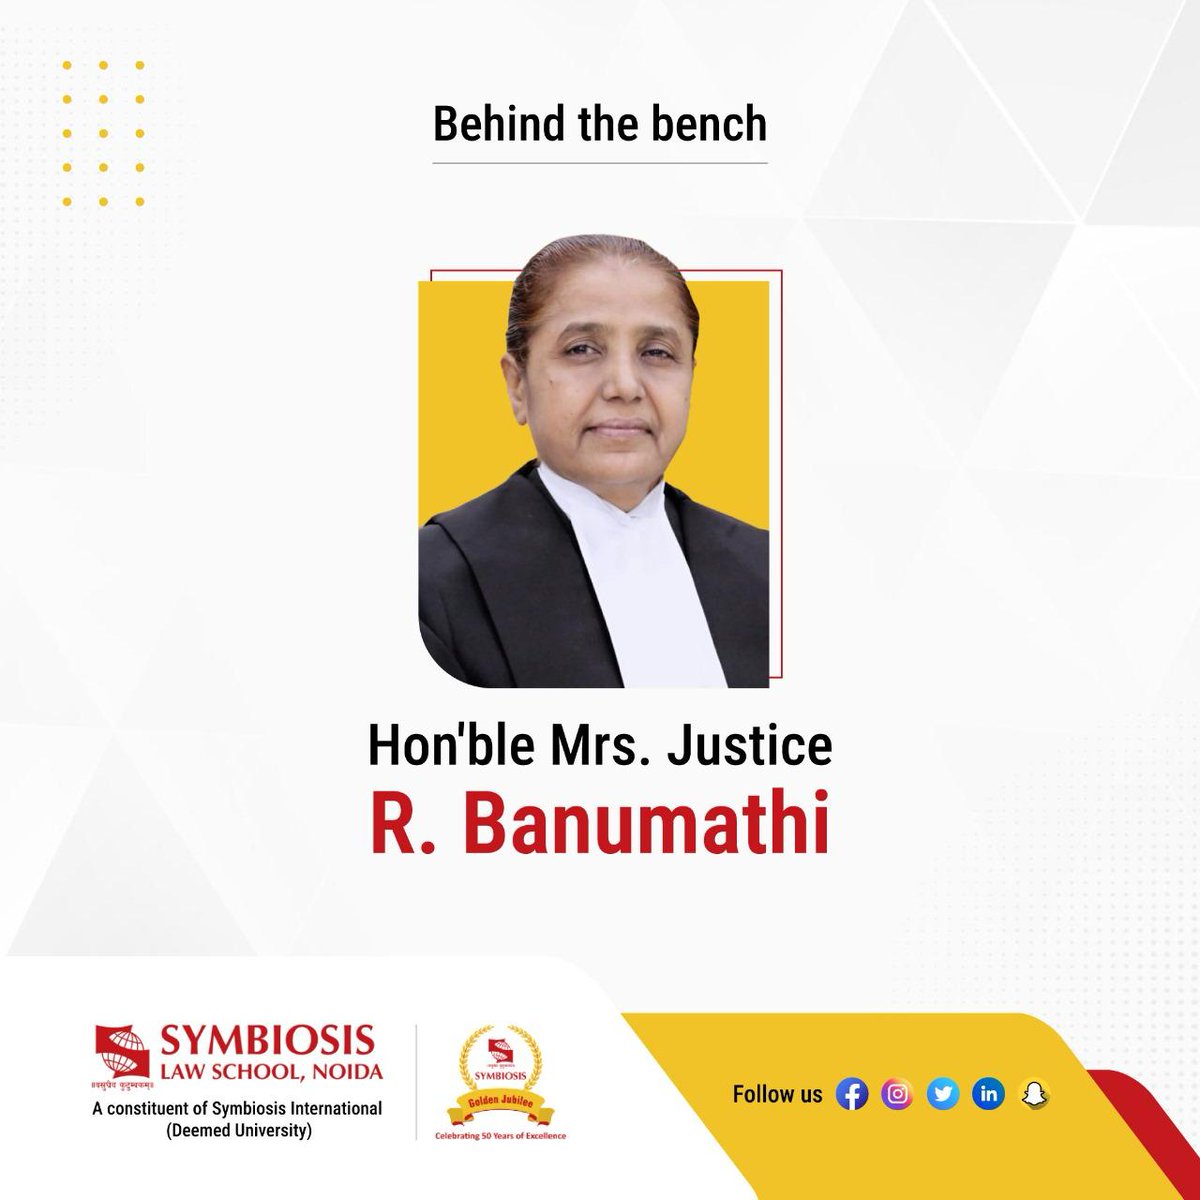 Hon'ble Justice Mrs. R. Banumathi, the 6th woman in India's Supreme Court, rose from Tamil Nadu's judicial service. Known for her dedication to justice and significant rulings, her career inspires the legal community. . . . #symbiosislawschool #Noida #behindthebench #SupremeCourt